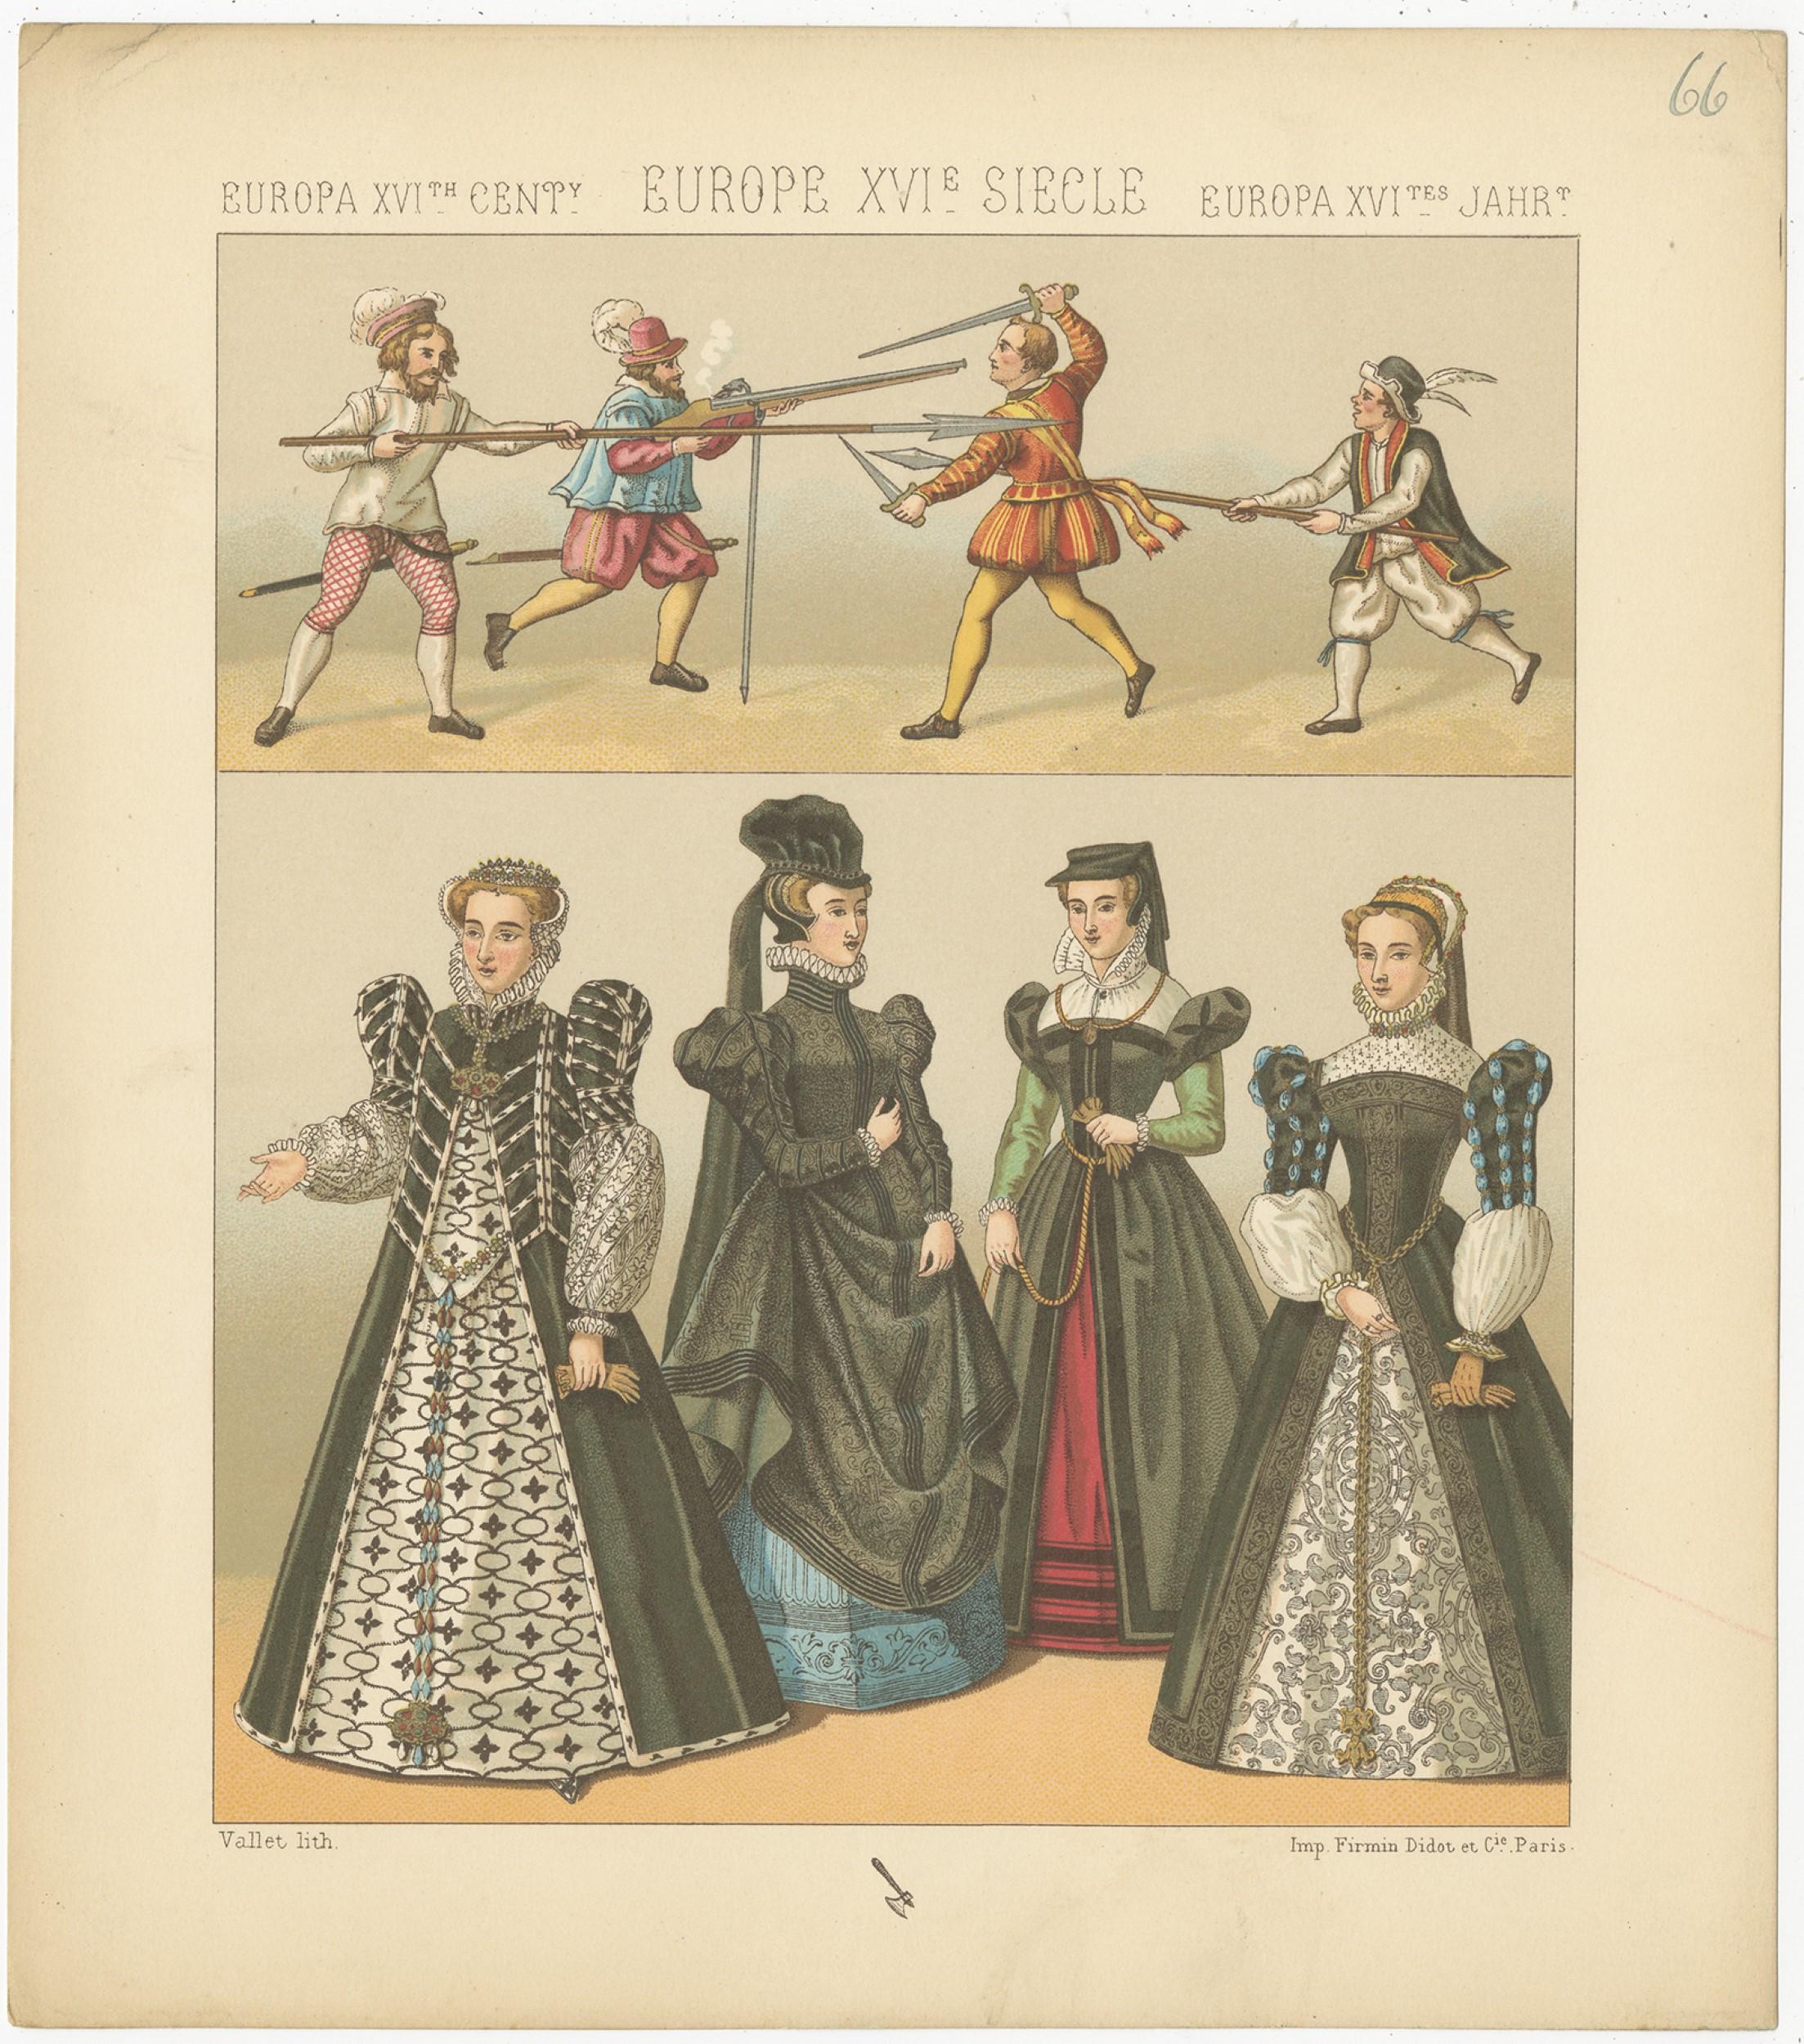 Antique print titled 'Europa XVI Cent - Europe XVIe Siecle - Europa XVItes Jahr'. Chromolithograph of European XVIth Century Costumes. This print originates from 'Le Costume Historique' by M.A. Racinet. Published circa 1880.